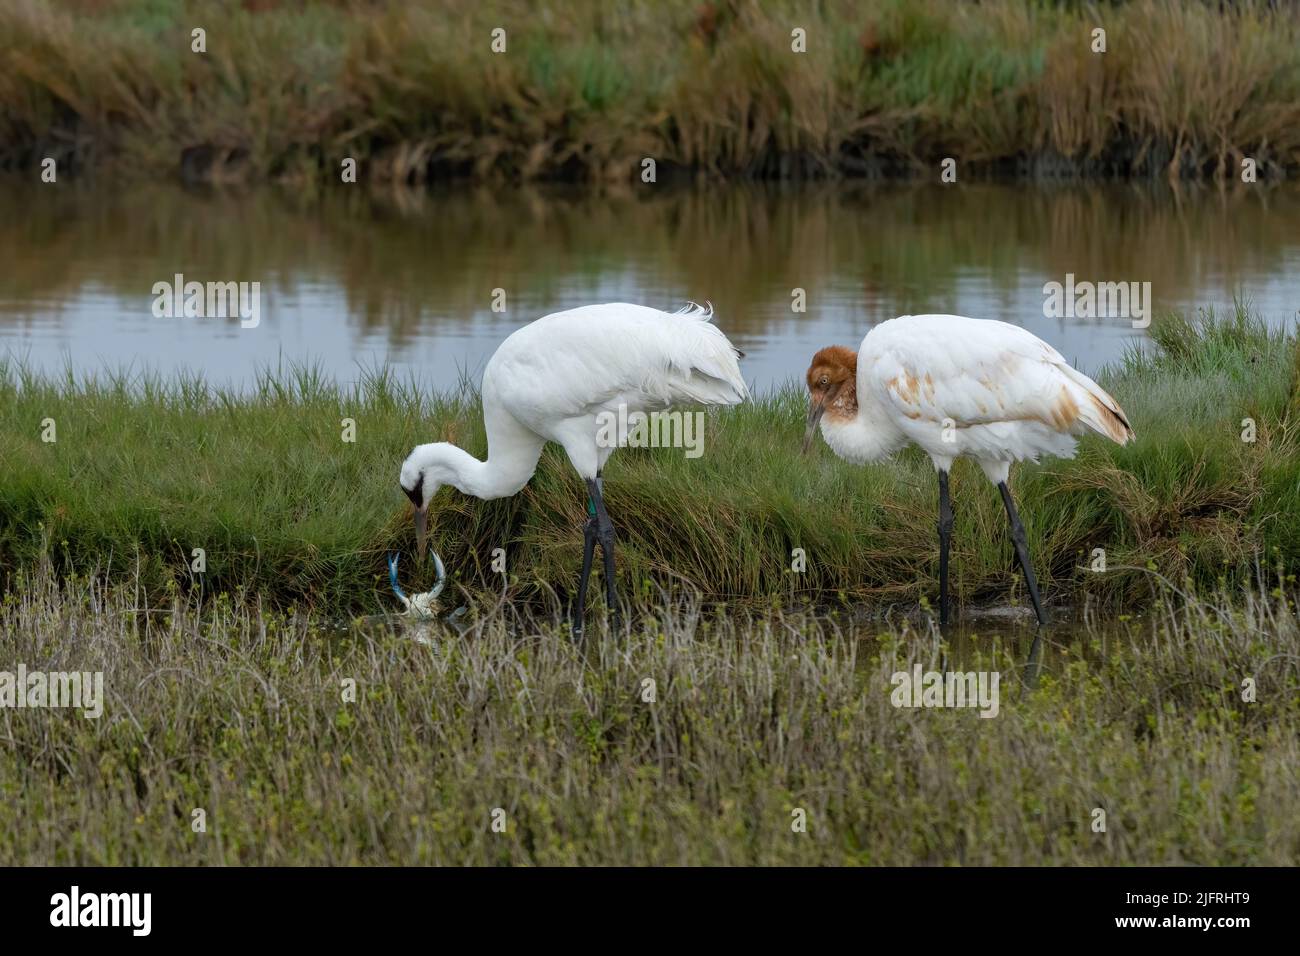 A Whooping Crane, Grus americana, catching an Atlantic Blue Crab in the Aransas National Wildlife Refuge in Texas.  The crab raises its claws in defen Stock Photo